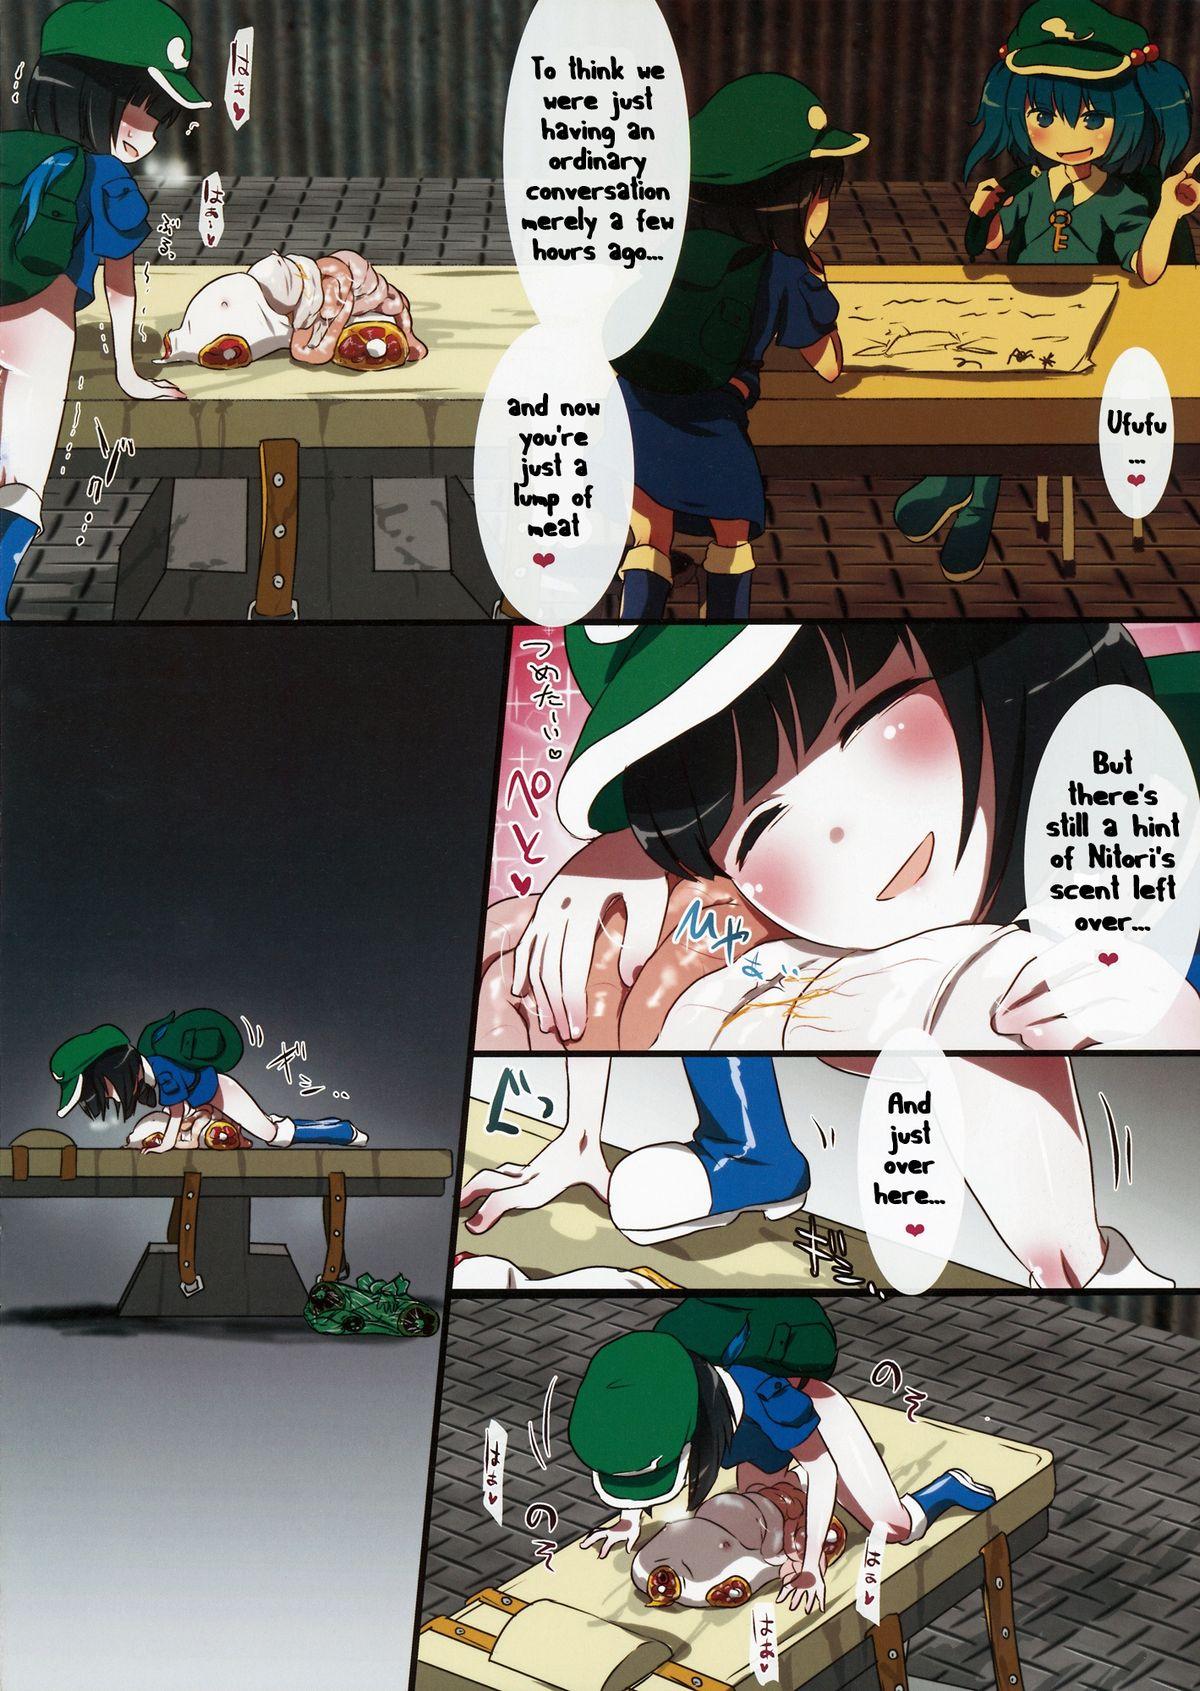 Assfingering 0210564801 - Touhou project Funny - Page 10